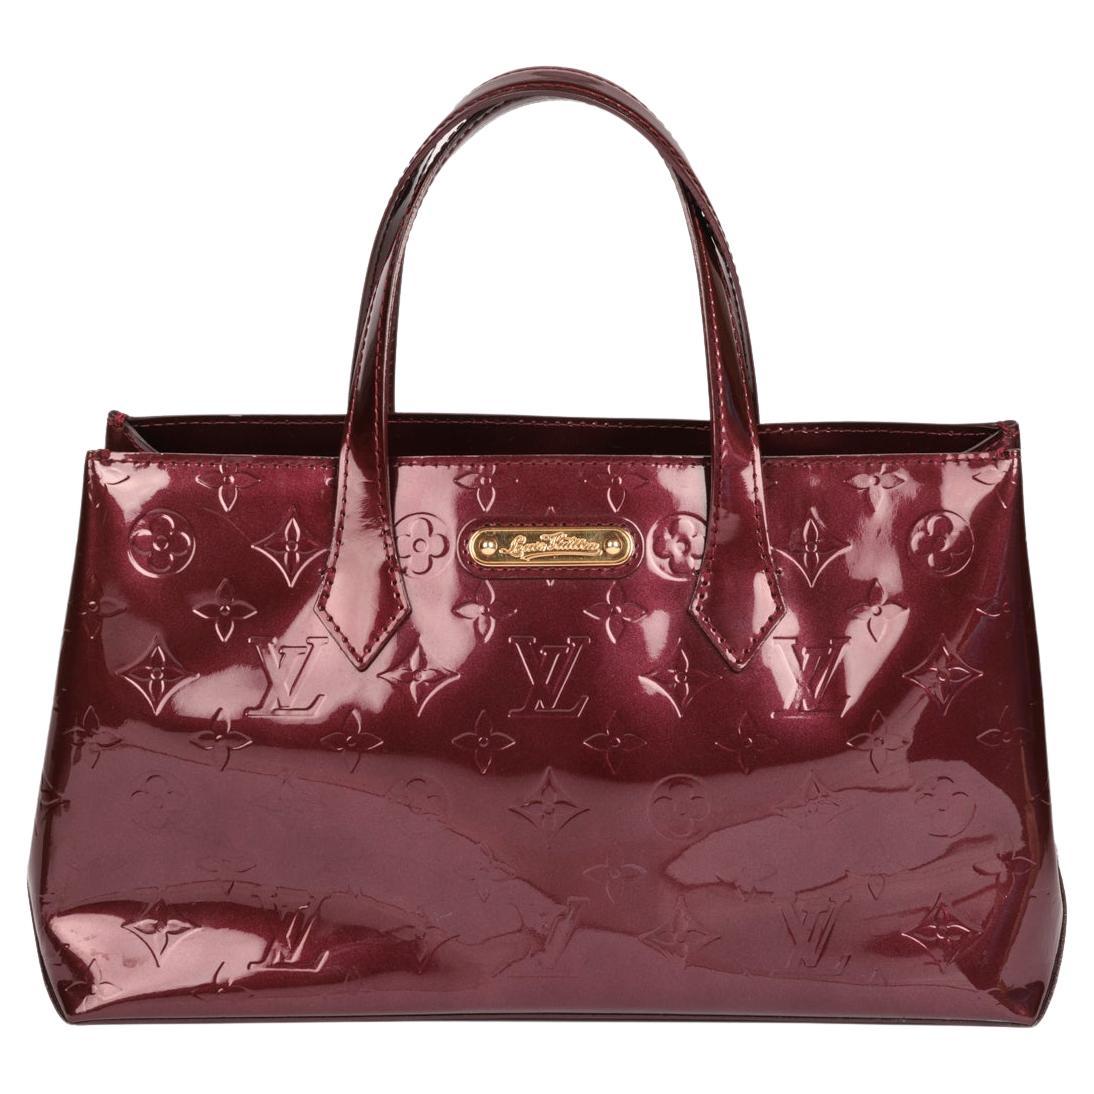 Can someone stitch this and let me know my options in this LV Vernis M